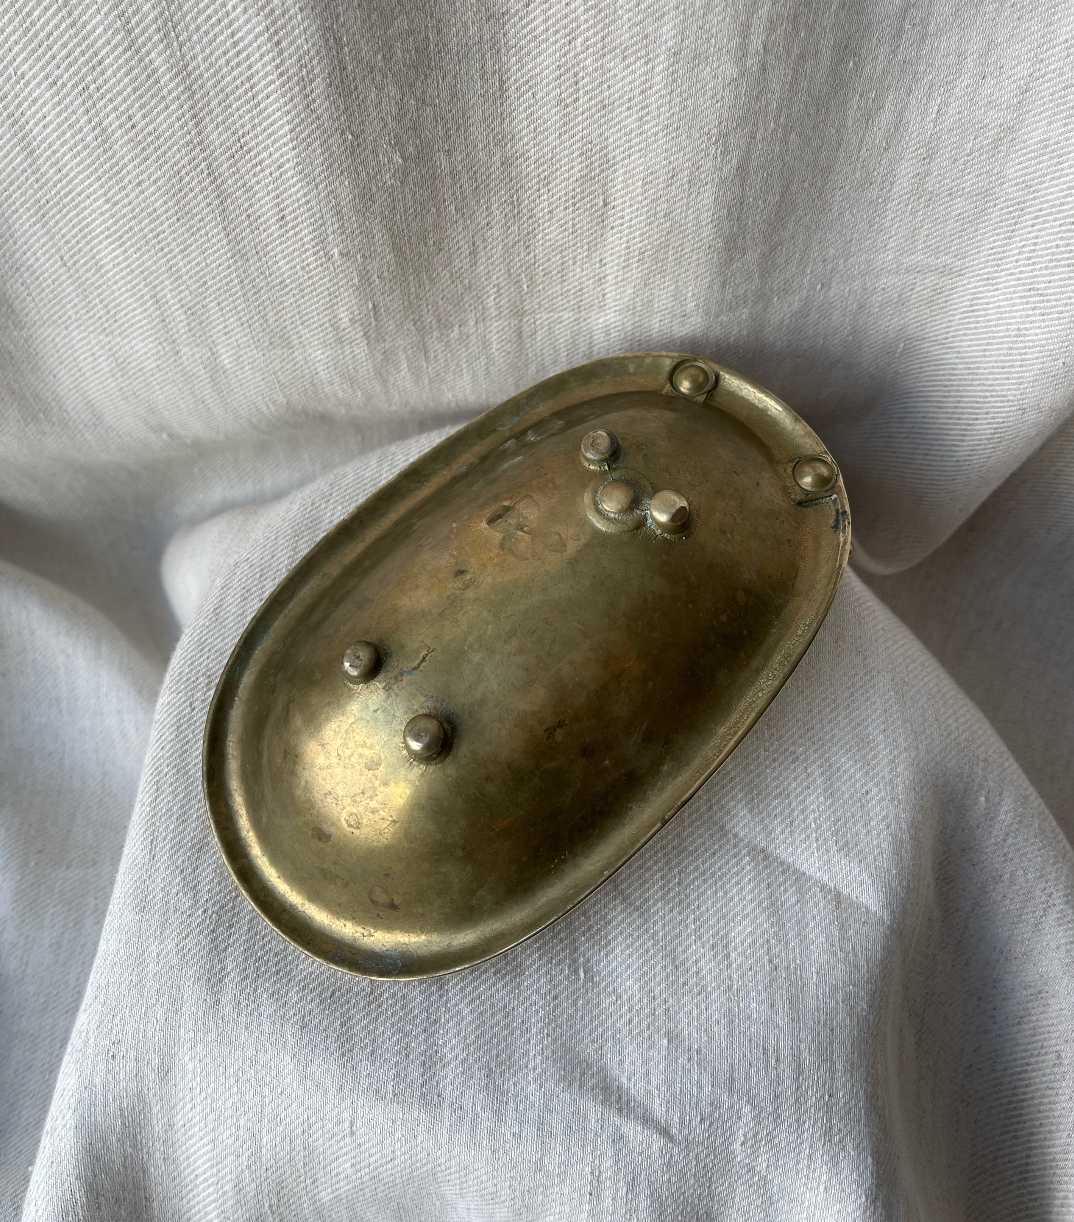 Vintage brass soap dish with taps